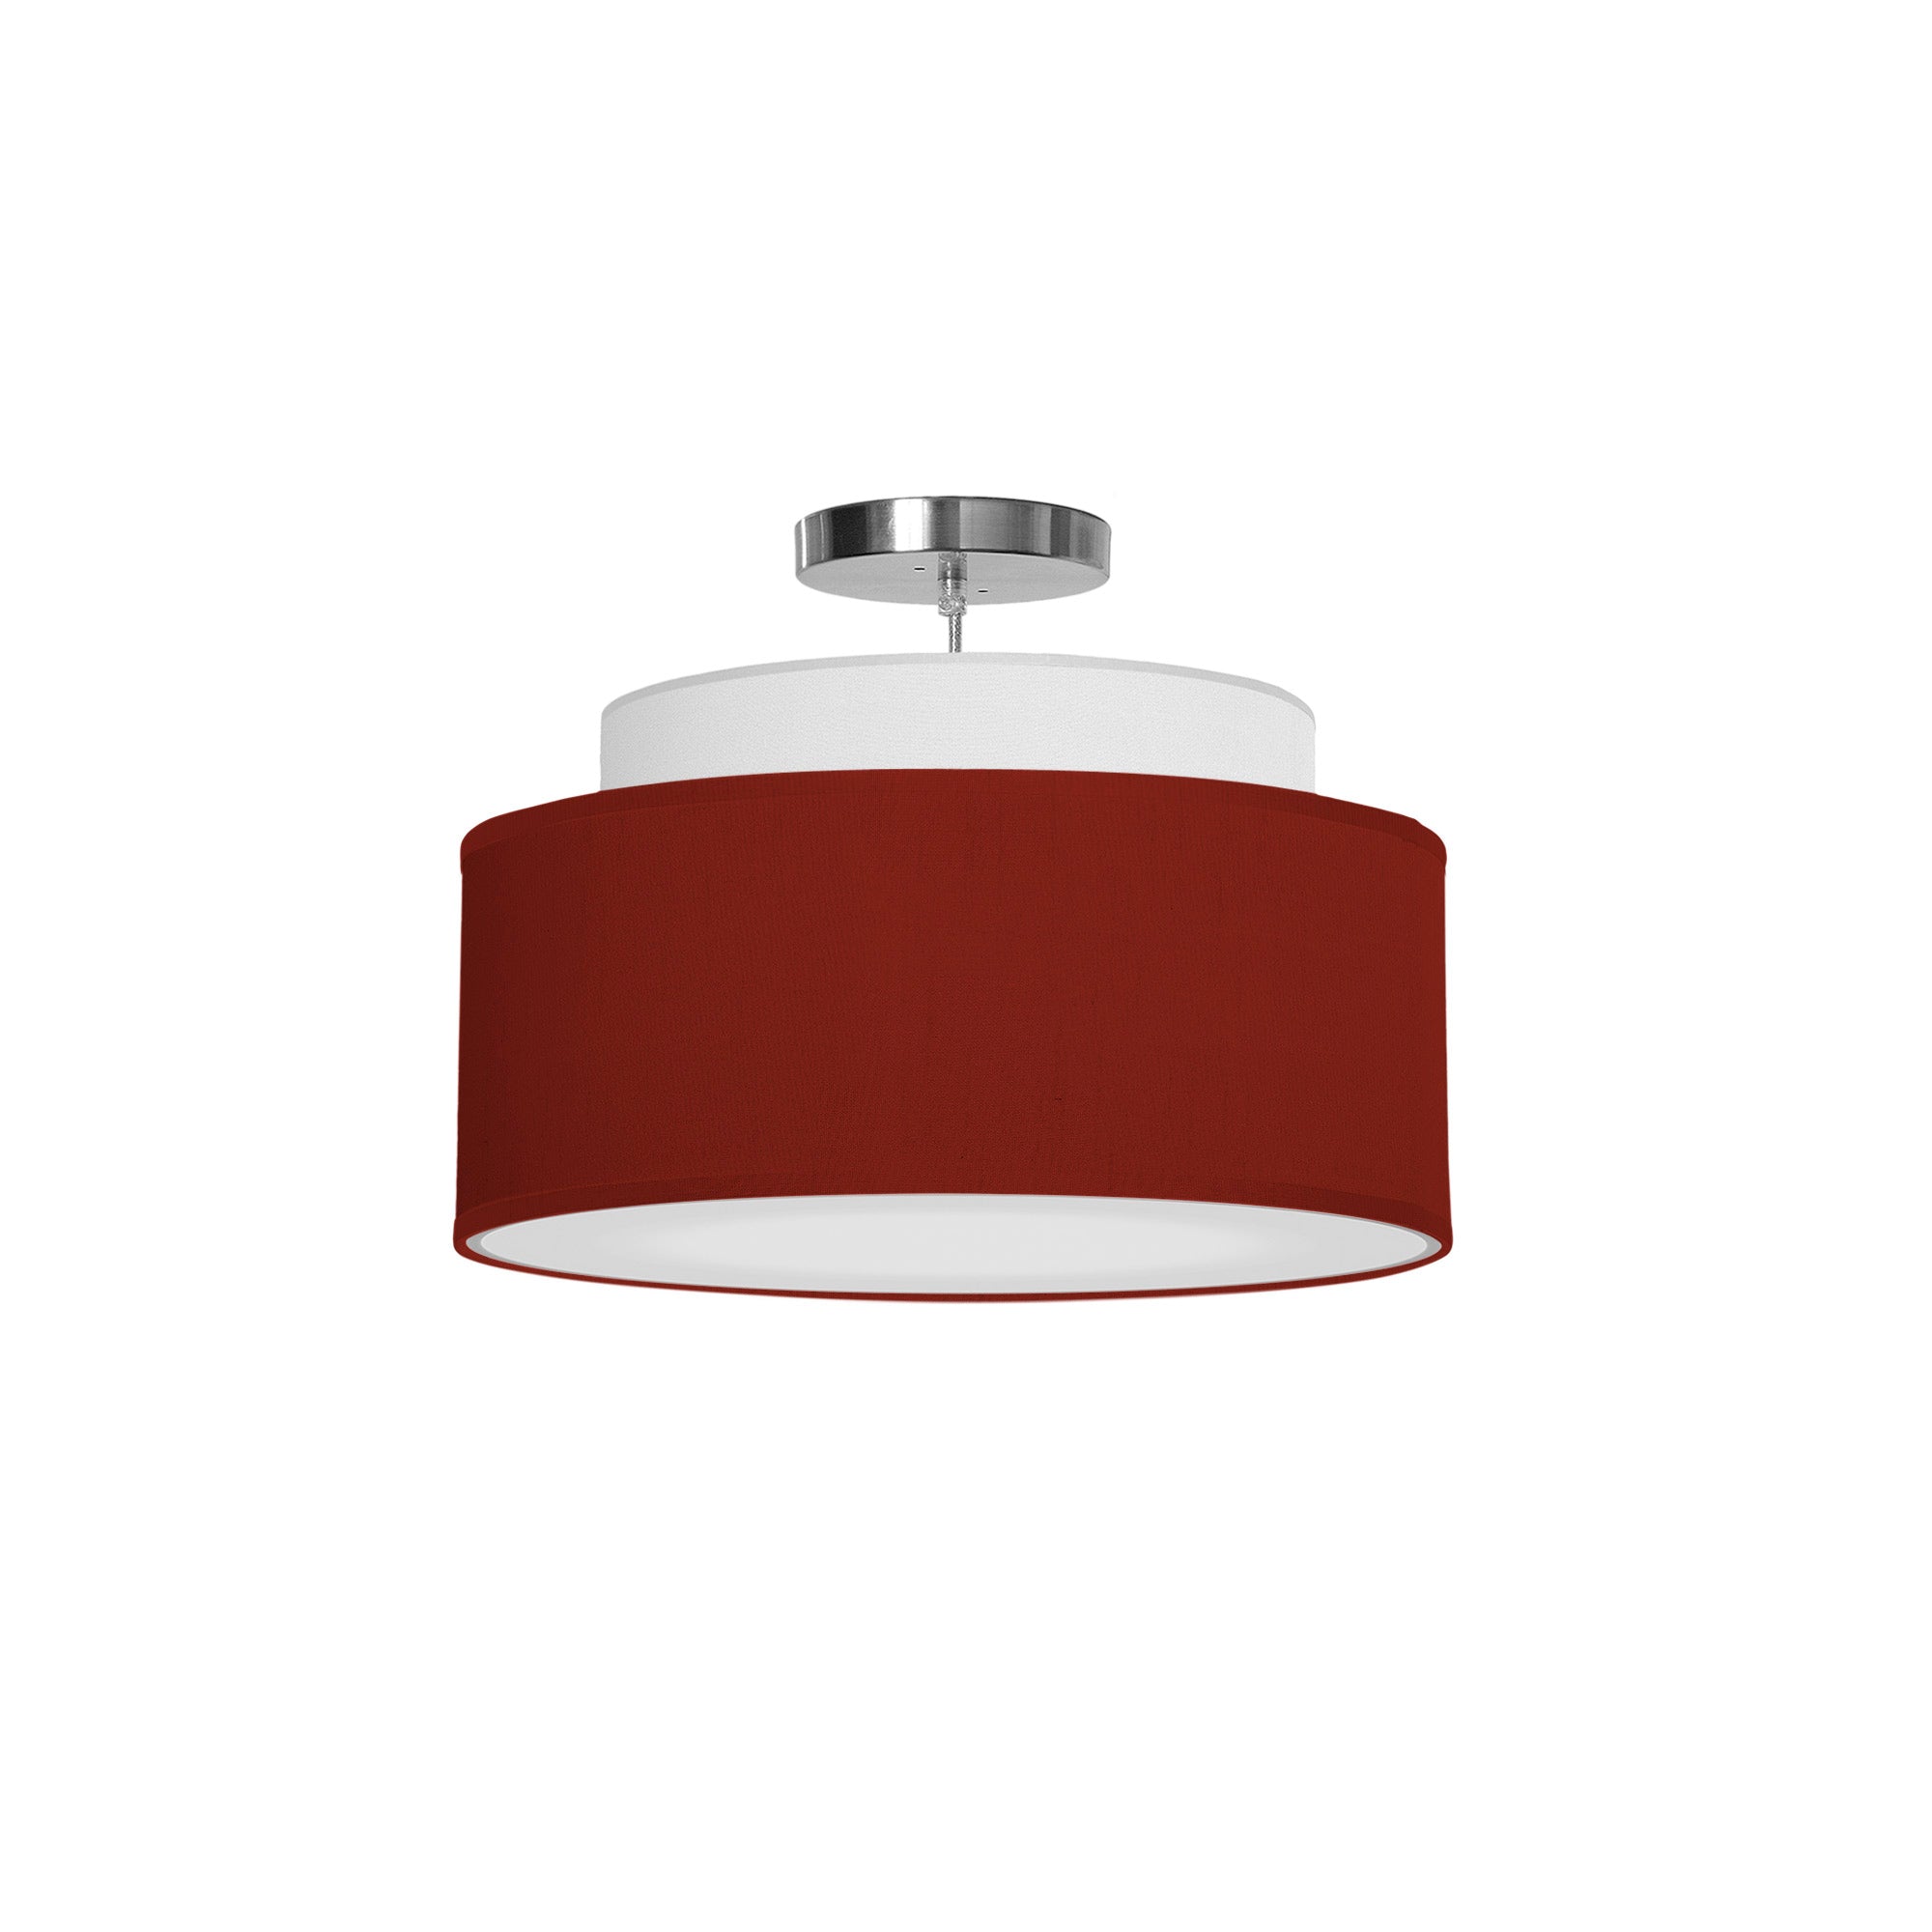 The Elsa Hanging Lamp from Seascape Fixtures with a silk shade in burgundy color.